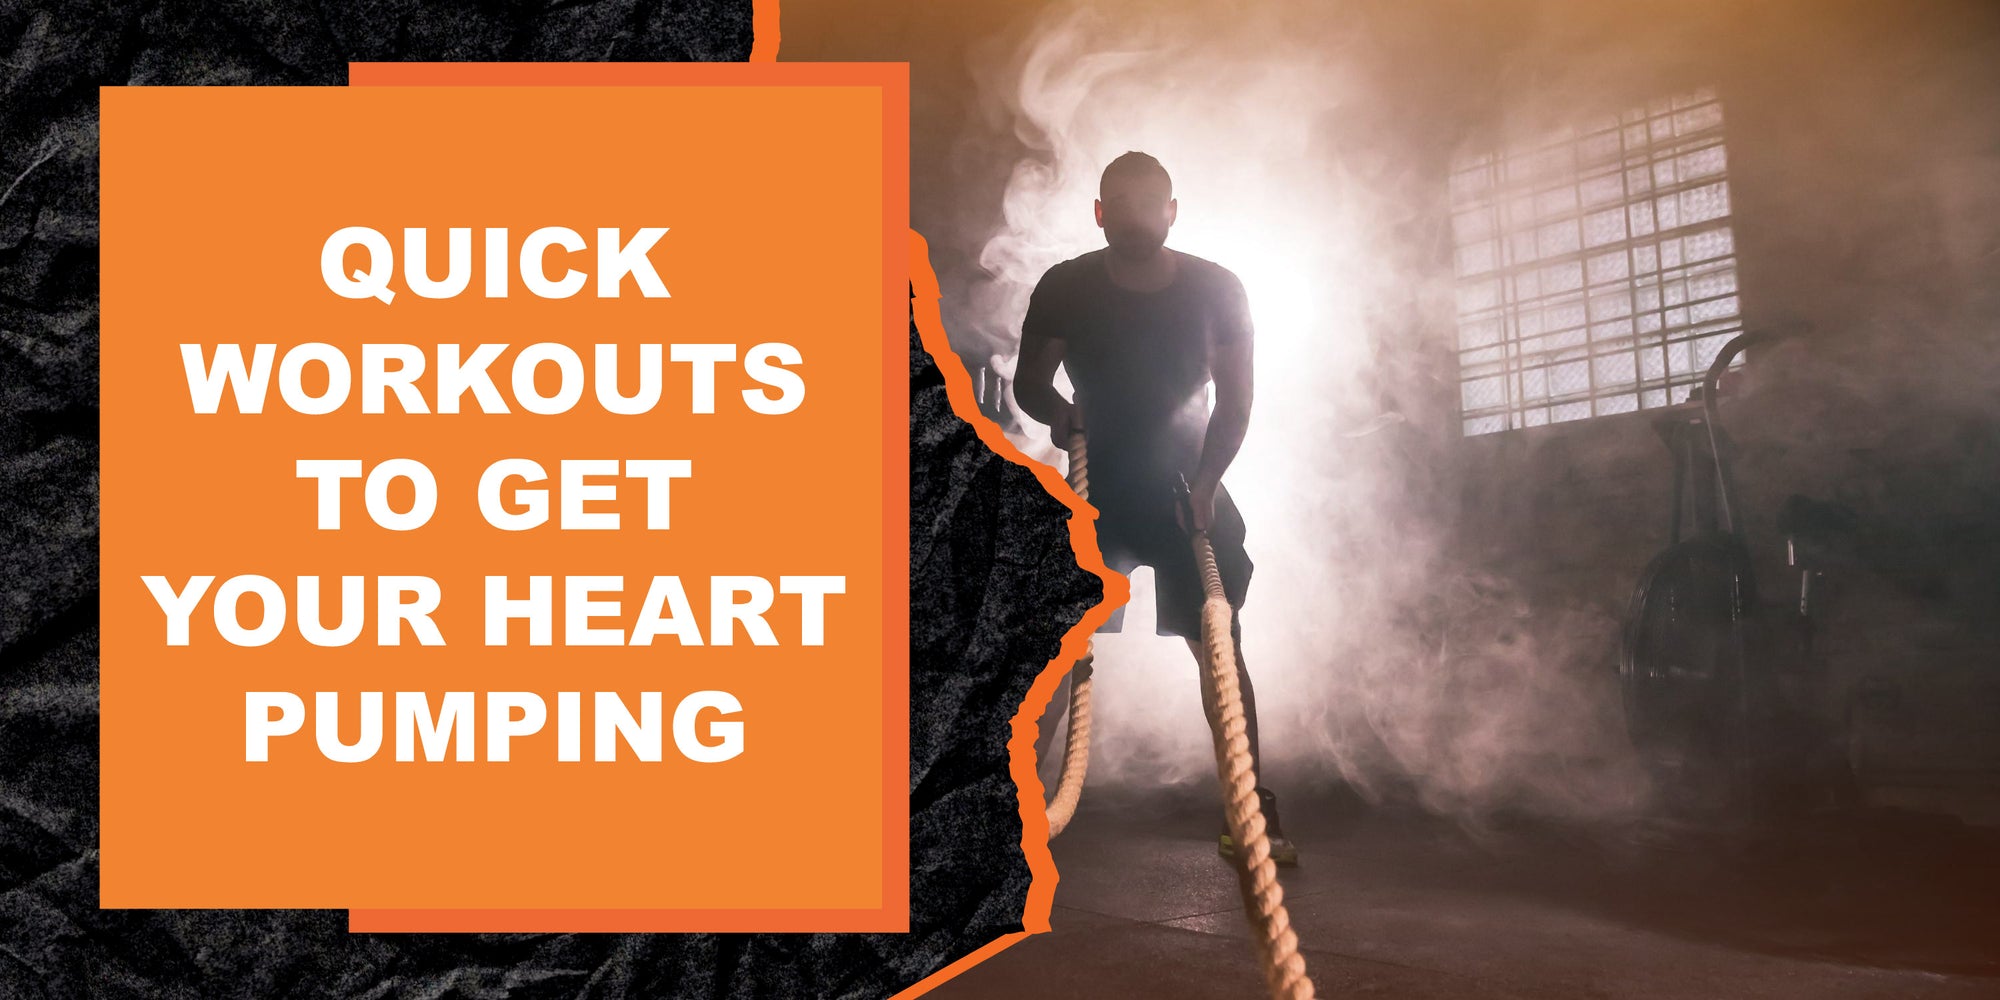 Quick Workouts to Get Your Heart Pumping